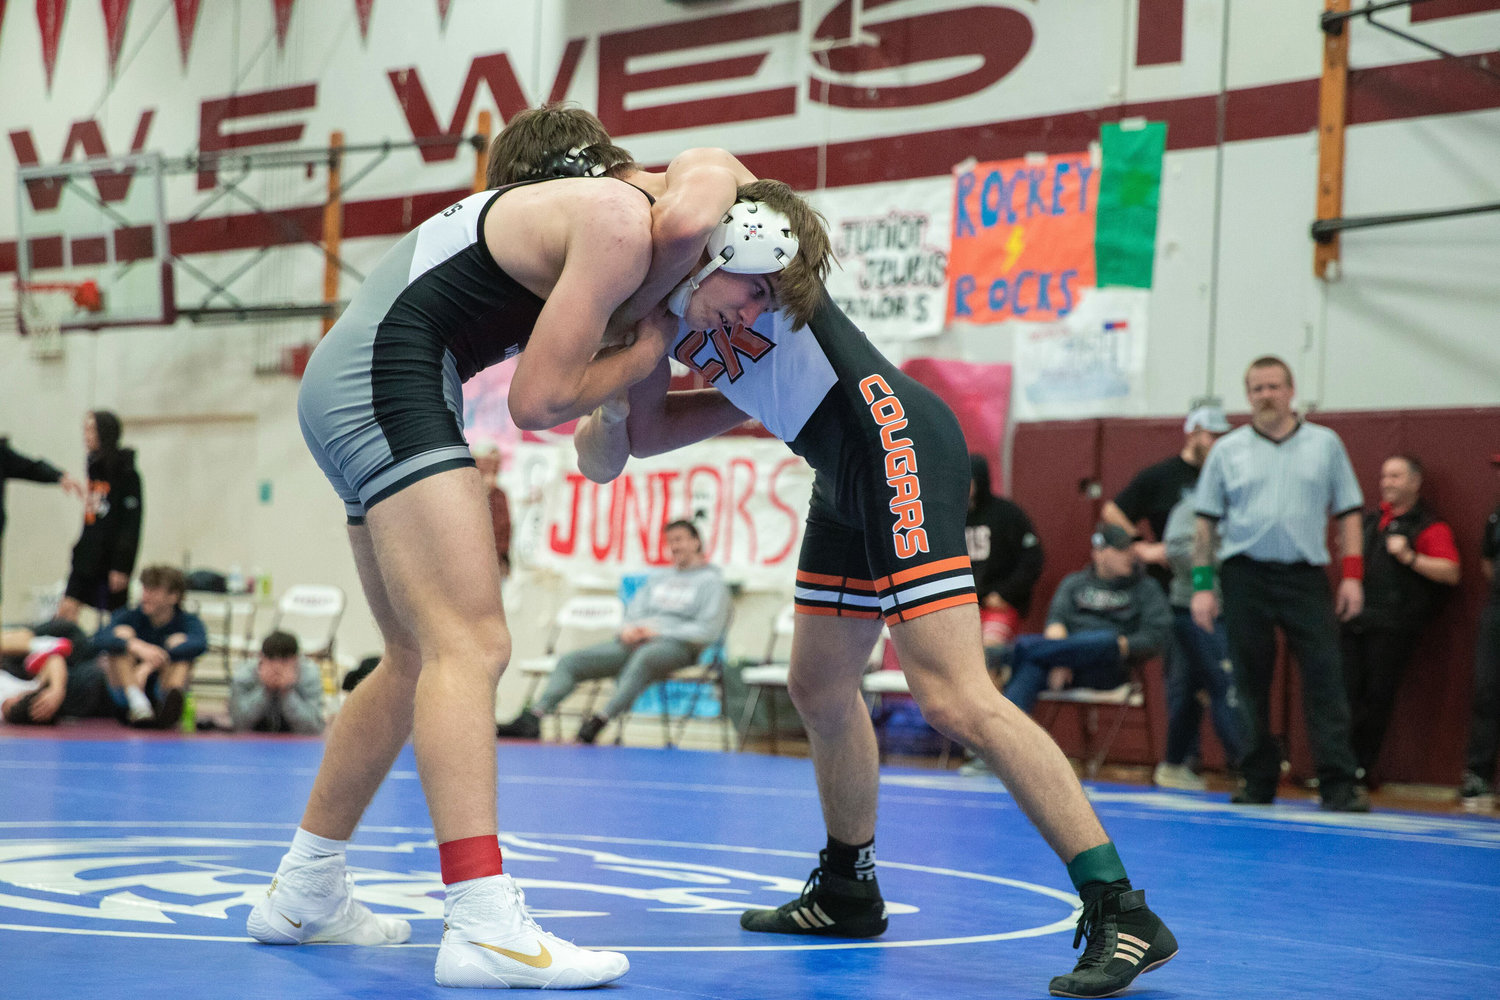 W.F. West’s Tucker Land wrestles Coke Erickson from Central Kitsap at 170 pounds during the Bearcat Invitational on Saturday in Chehalis.